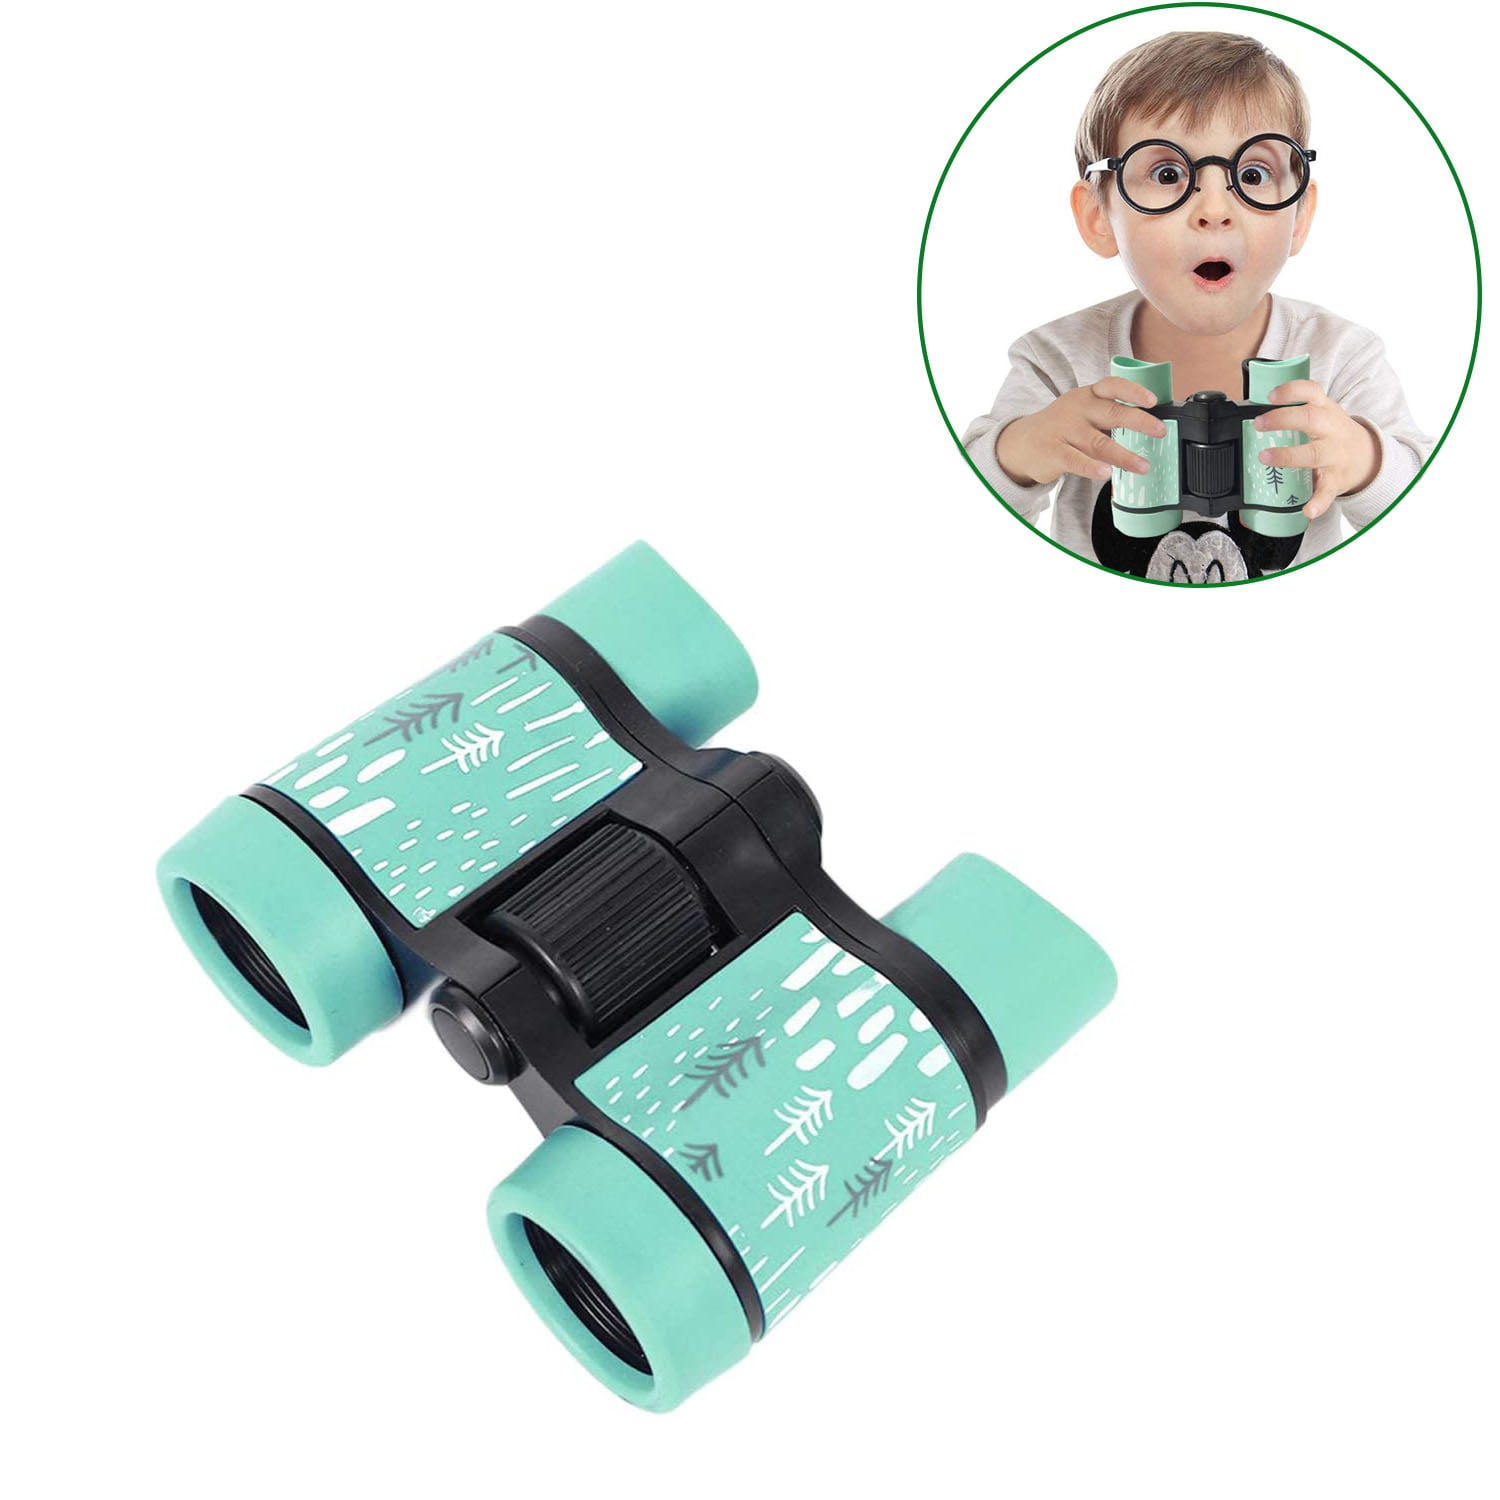 Compact Telescope Binoculars Outdoor Travel Hunting Boys Gifts 3-12 Years Old 